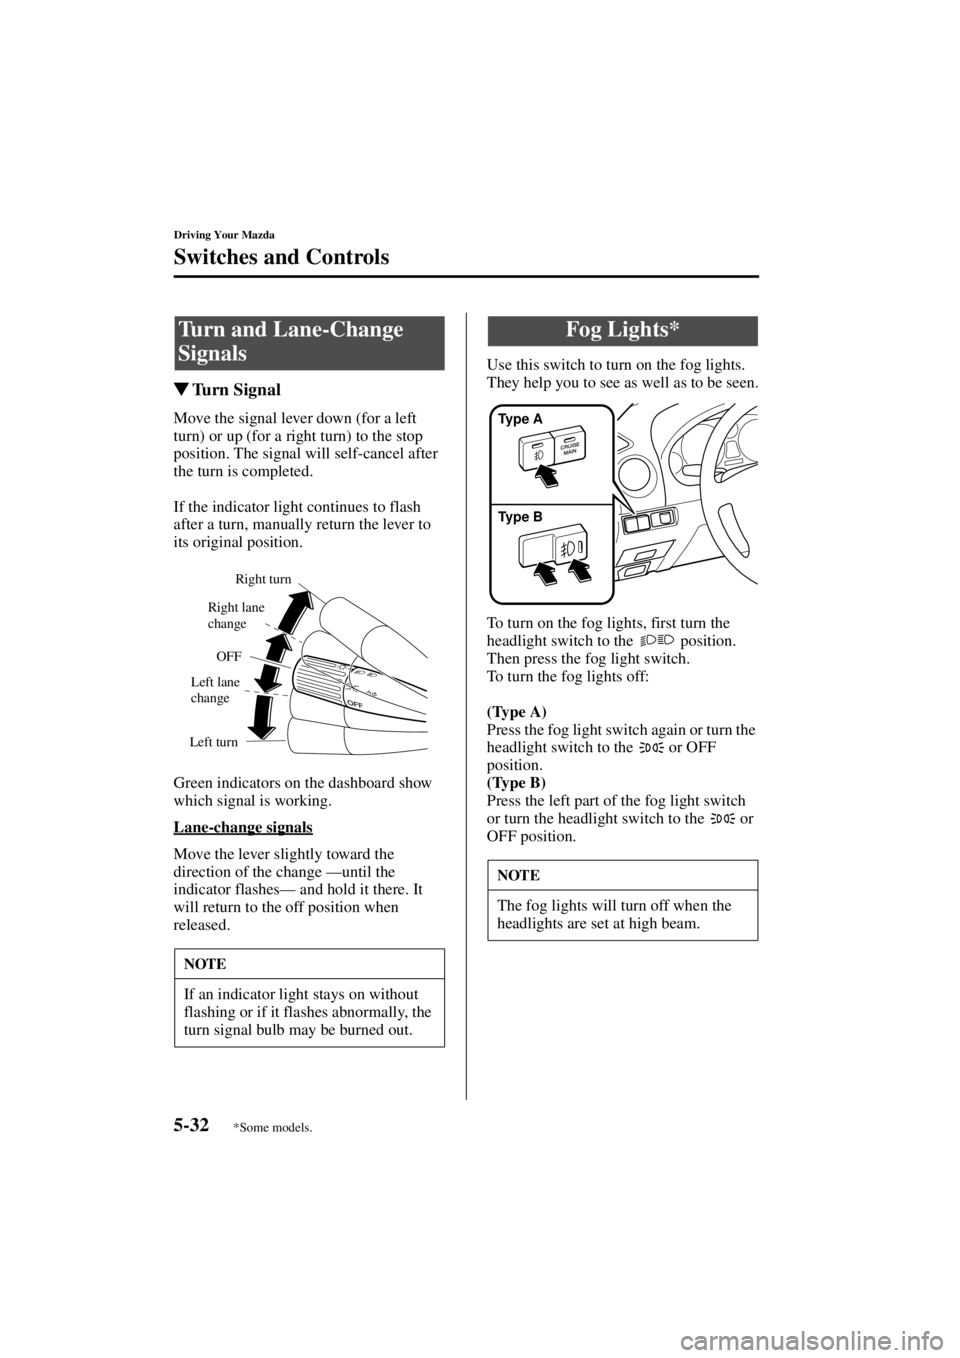 MAZDA MODEL SPEED MX-5 MIATA 2004  Owners Manual 5-32
Driving Your Mazda
Switches and Controls
Form No. 8T02-EA-03L
Turn Signal
Move the signal lever down (for a left 
turn) or up (for a right turn) to the stop 
position. The signal will self-cance